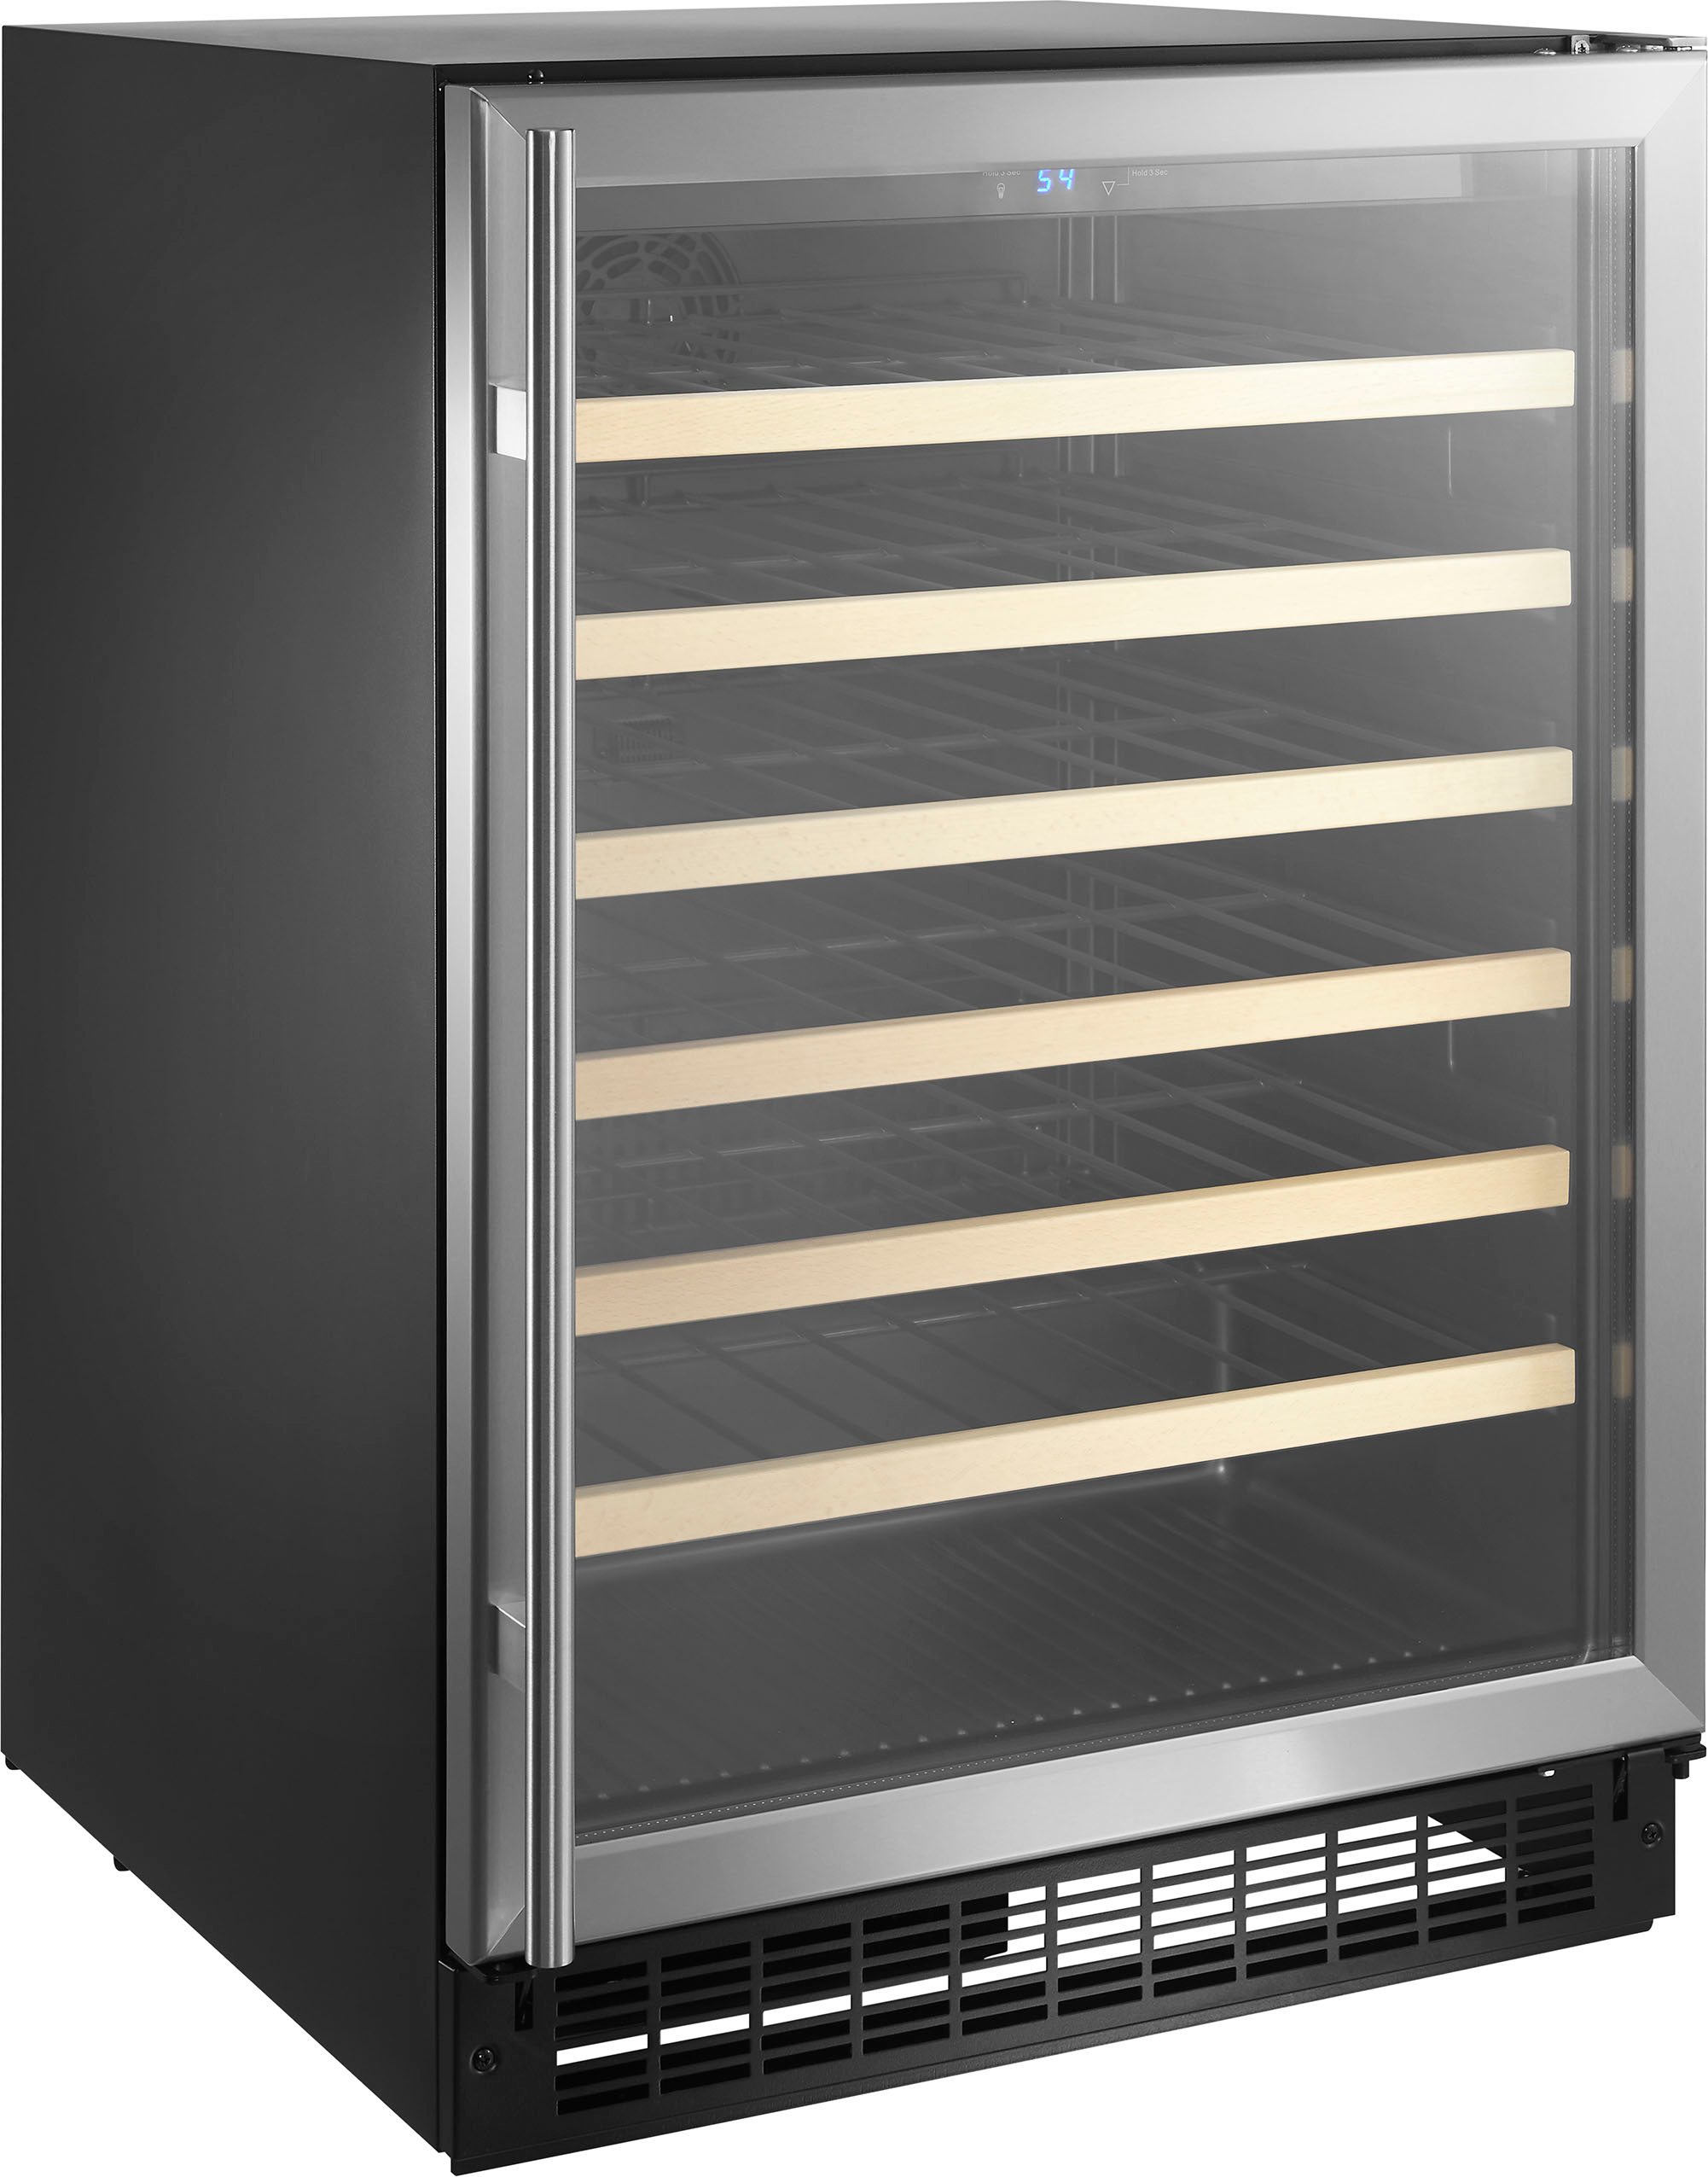 Angle View: NewAir - 24” Built-in 46 Bottle Dual Zone Compressor Wine Cooler with Beech Wood Shelves - Stainless Steel